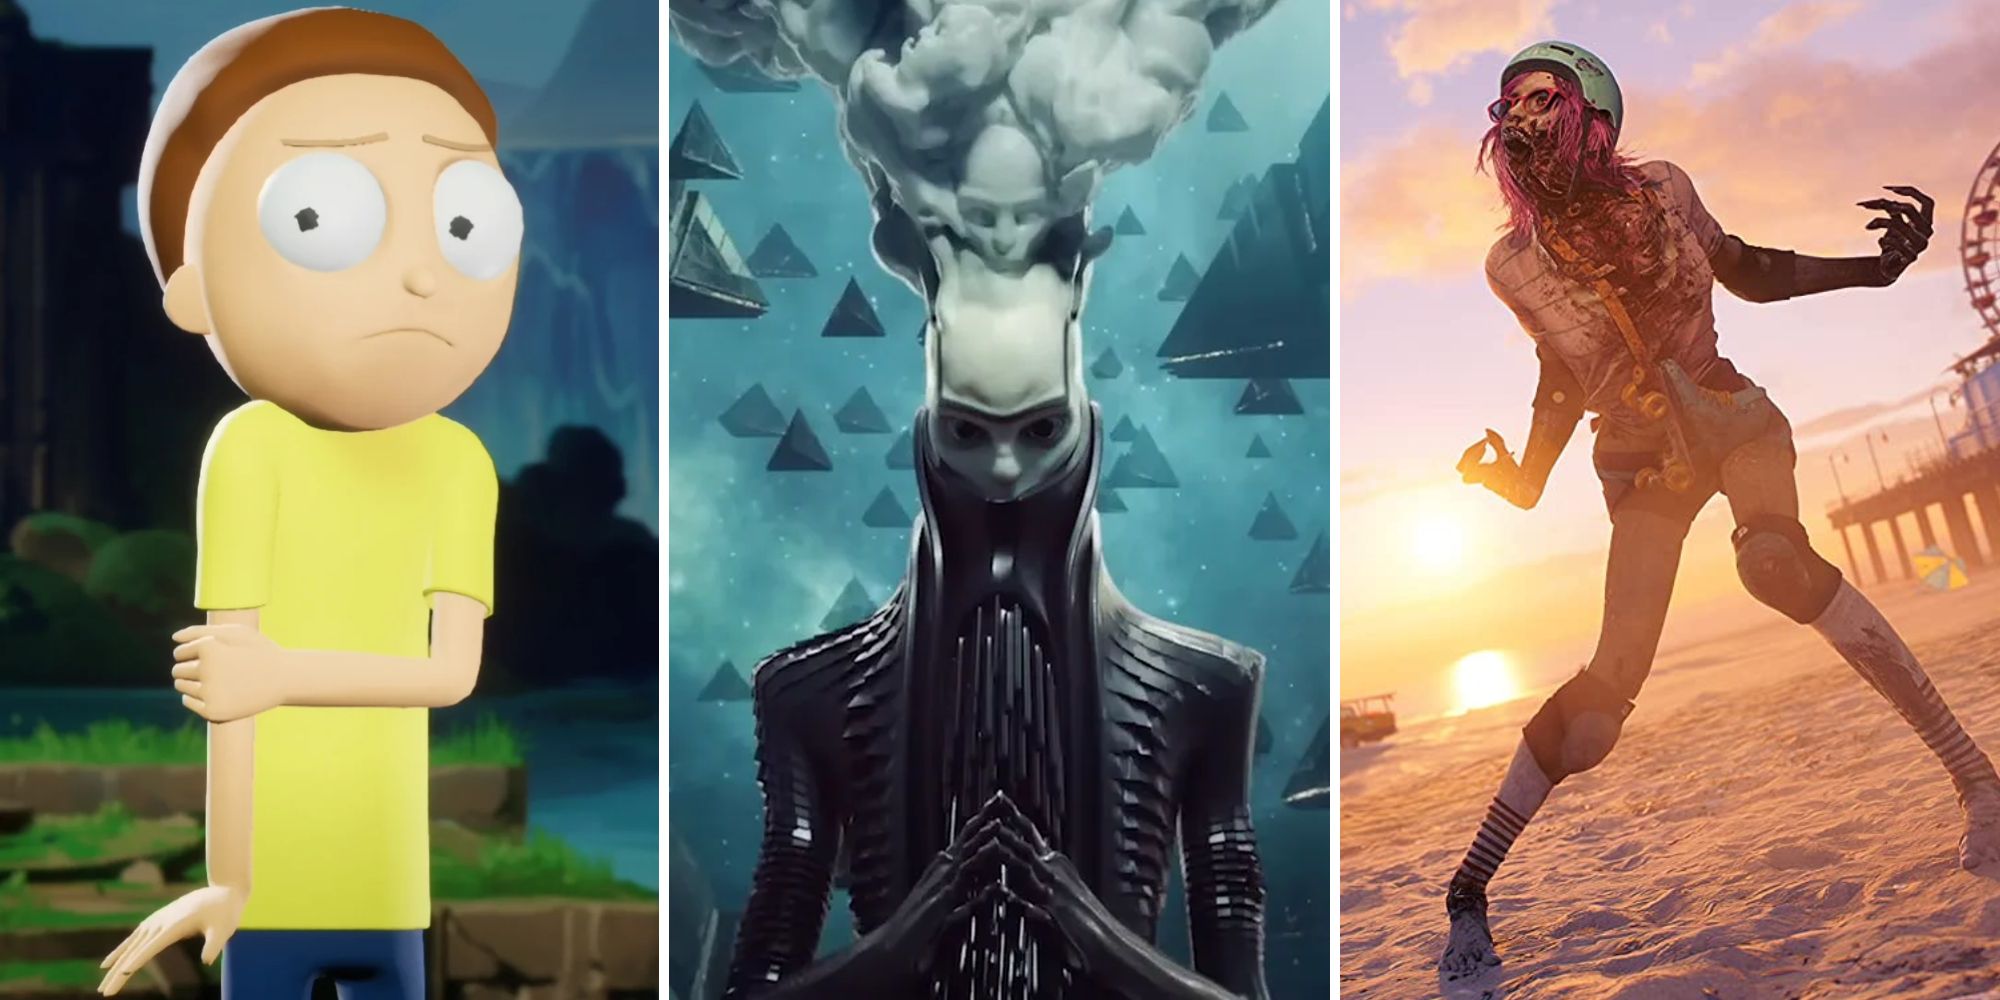 Morty, a large person surrounding by pyramids from the Destiny 2 Lightfall expansion trailer, and a zombie from Dead Island 2